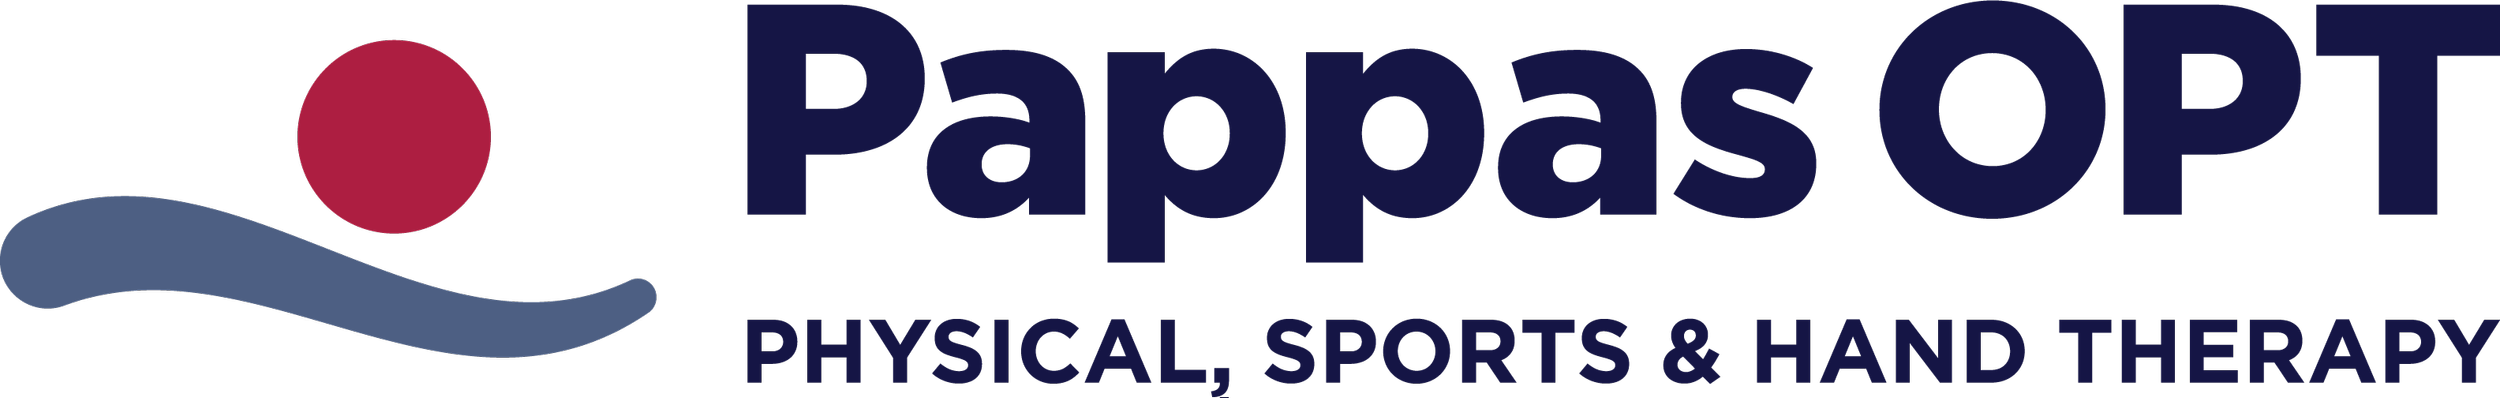 Pappas Physical, Sport, And Hand Therapy